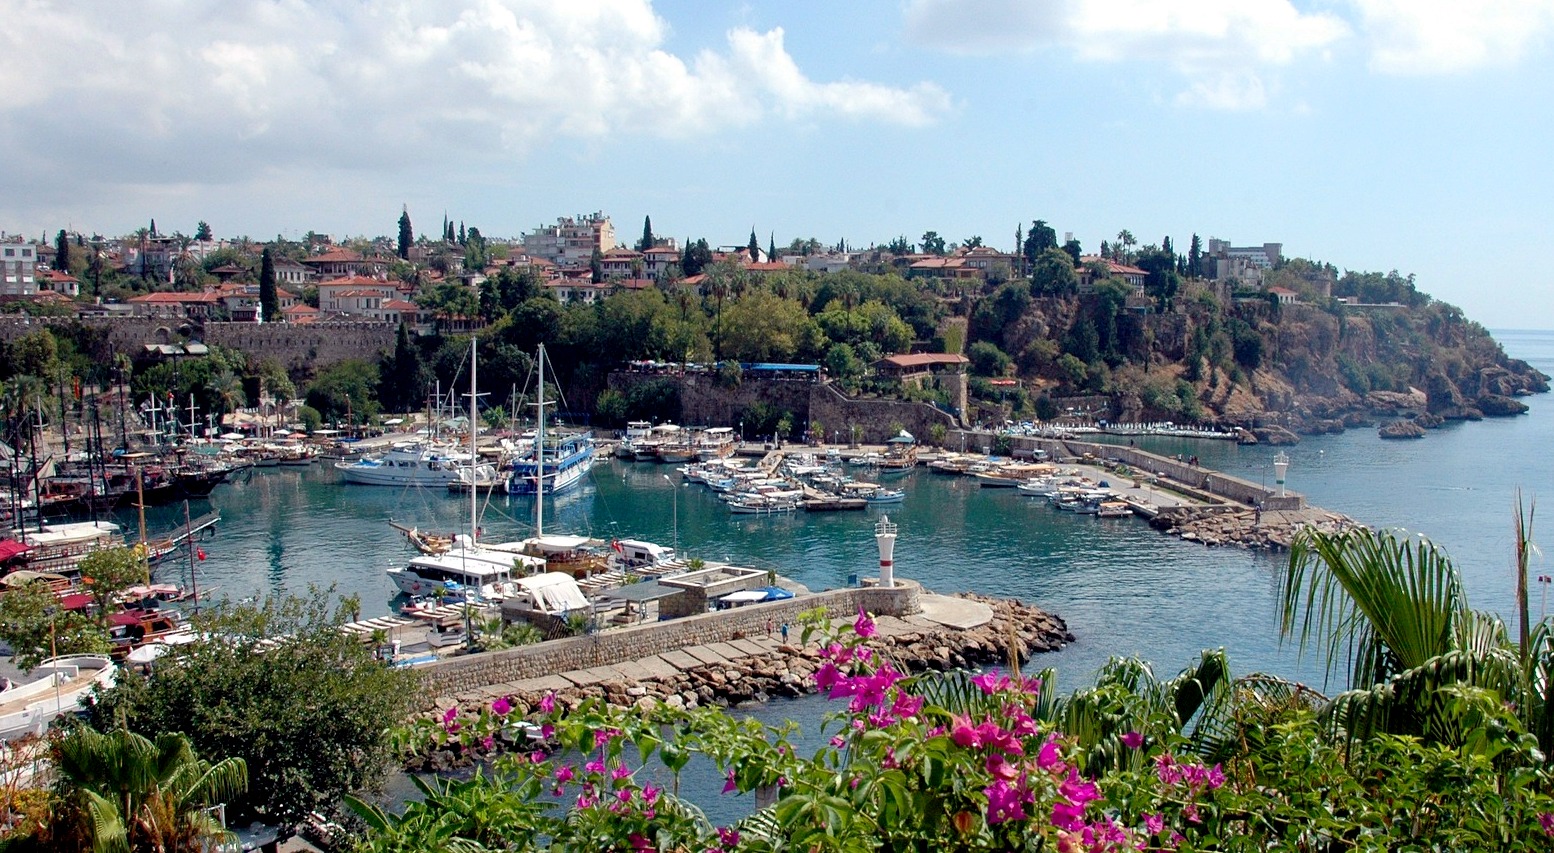 How to Spend One Day in Antalya